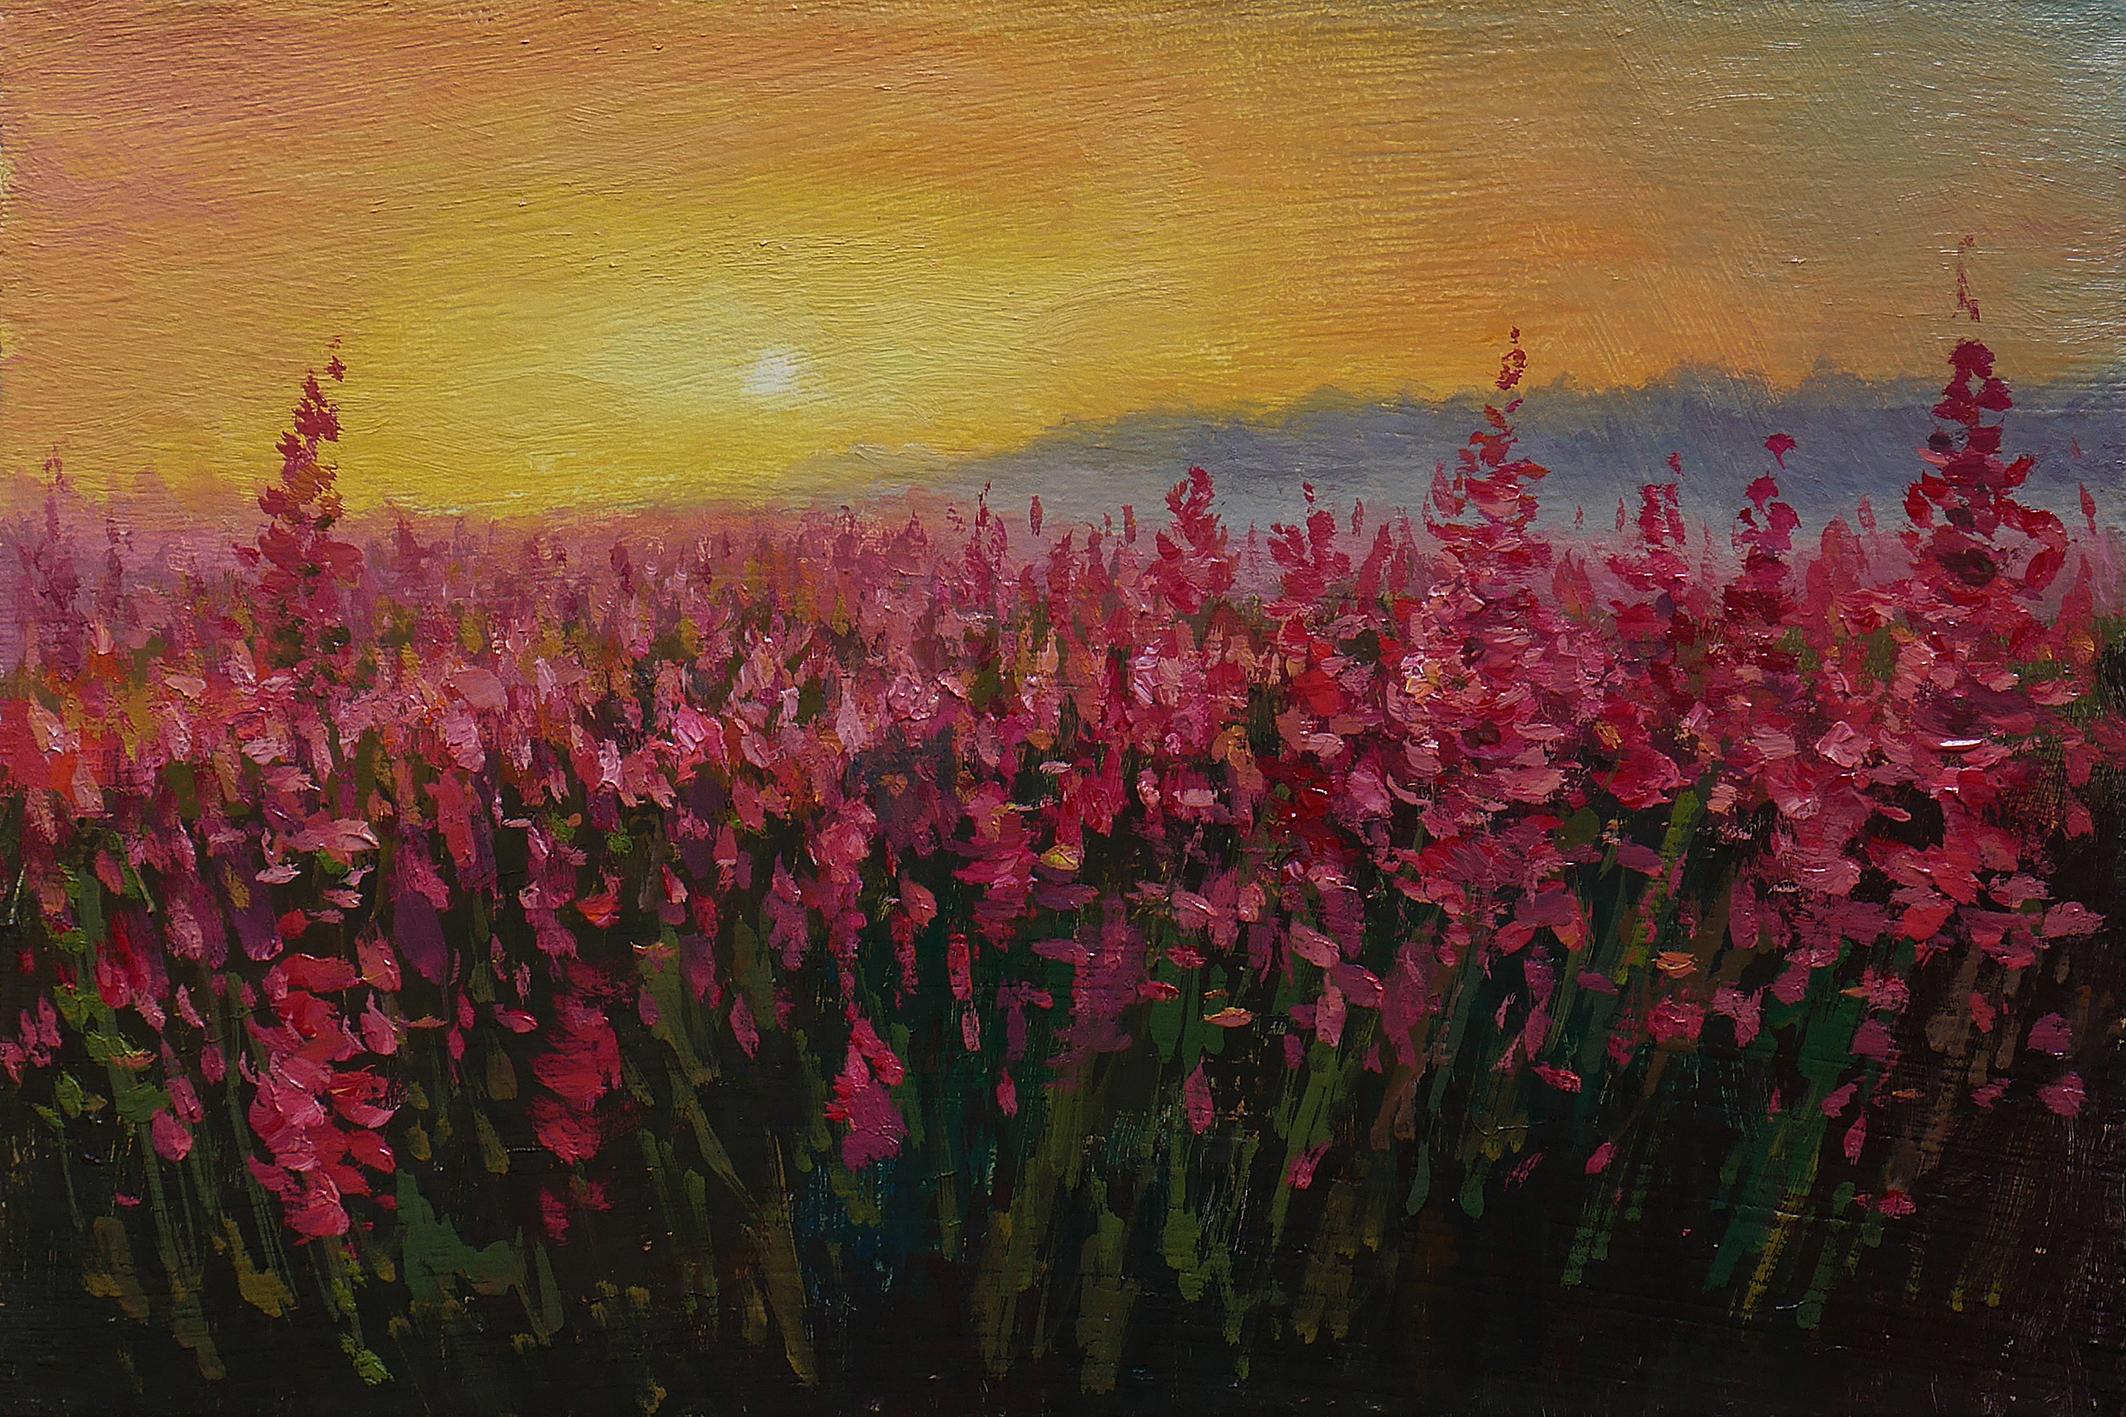 Nikolay Dmitriev Landscape Painting - The Sunny Fireweed Field - original summer landscape painting